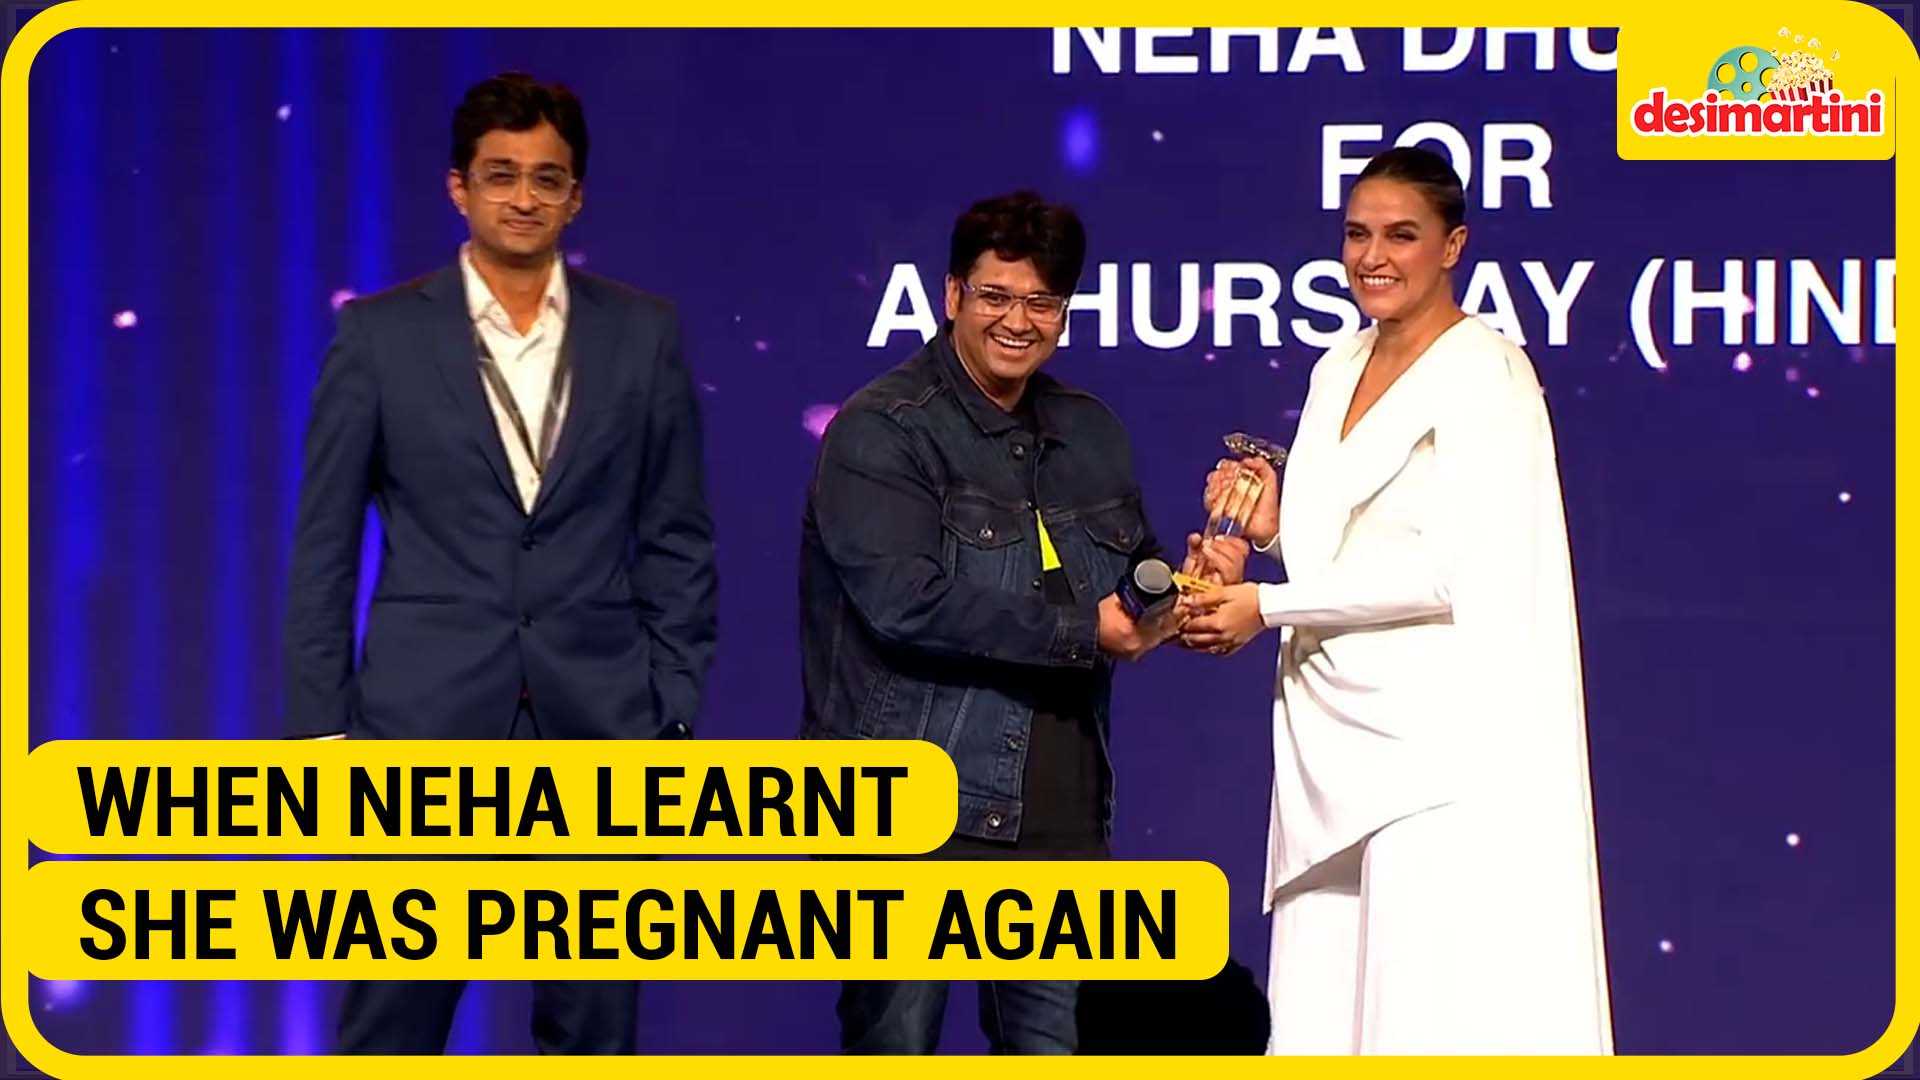 OTT Play Awards 2022: Neha Dhupia reveals she had to almost give up her role in A Thursday after learning about her pregnancy